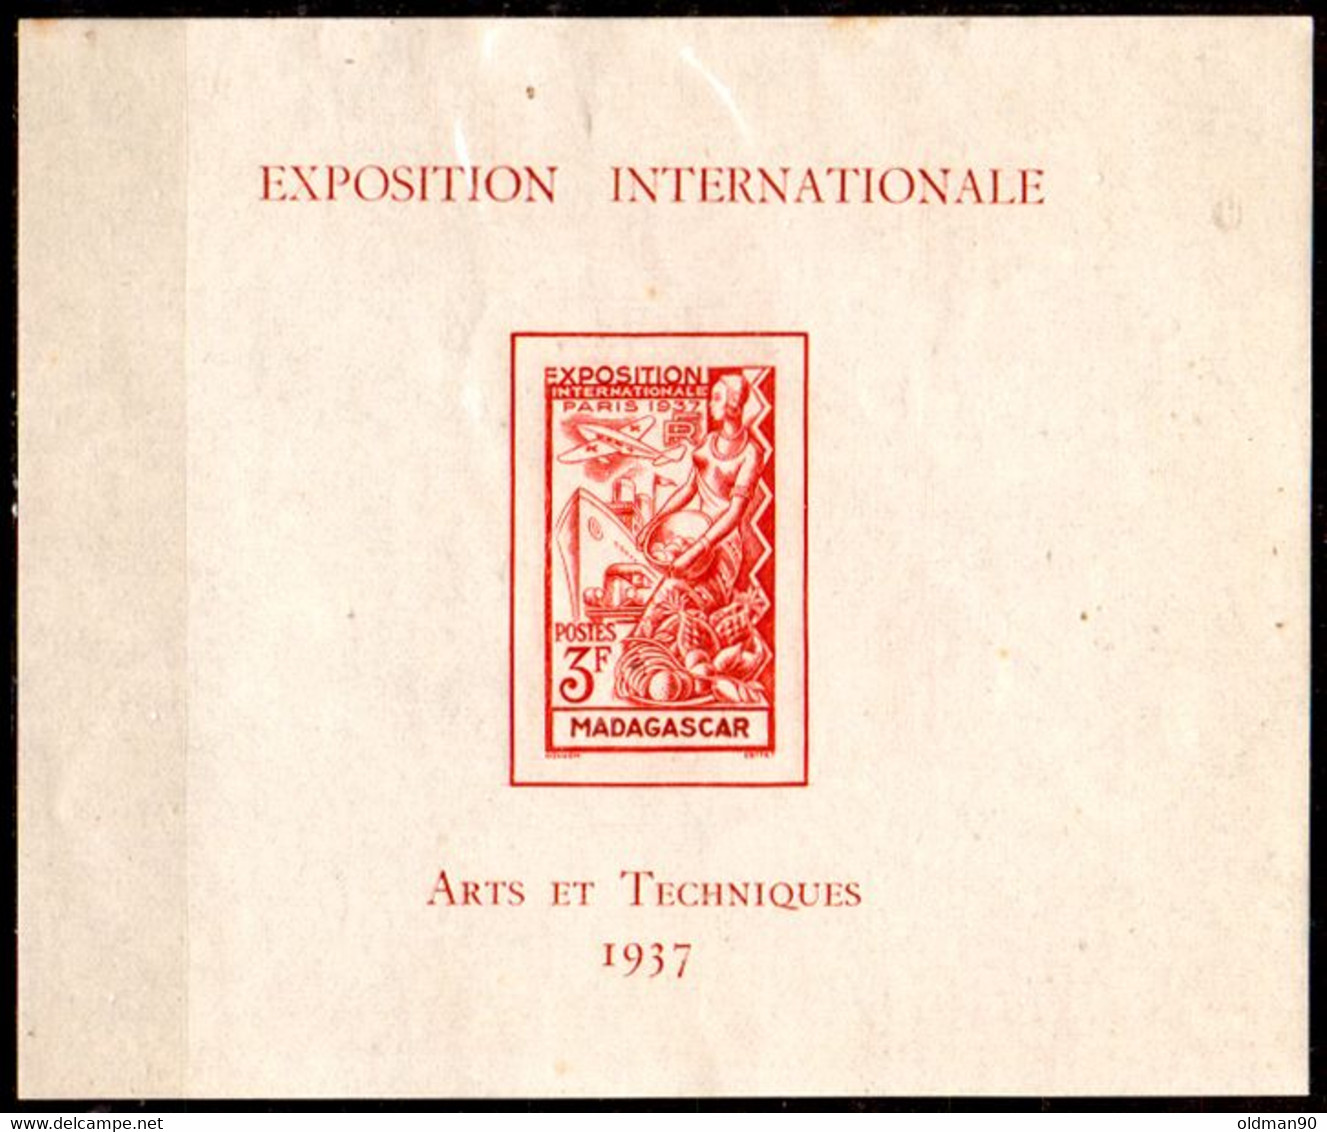 Madagascar -139- SOUVENIR SHEET, Issued By 1937 - Quality In Your Opinion. - Impuestos